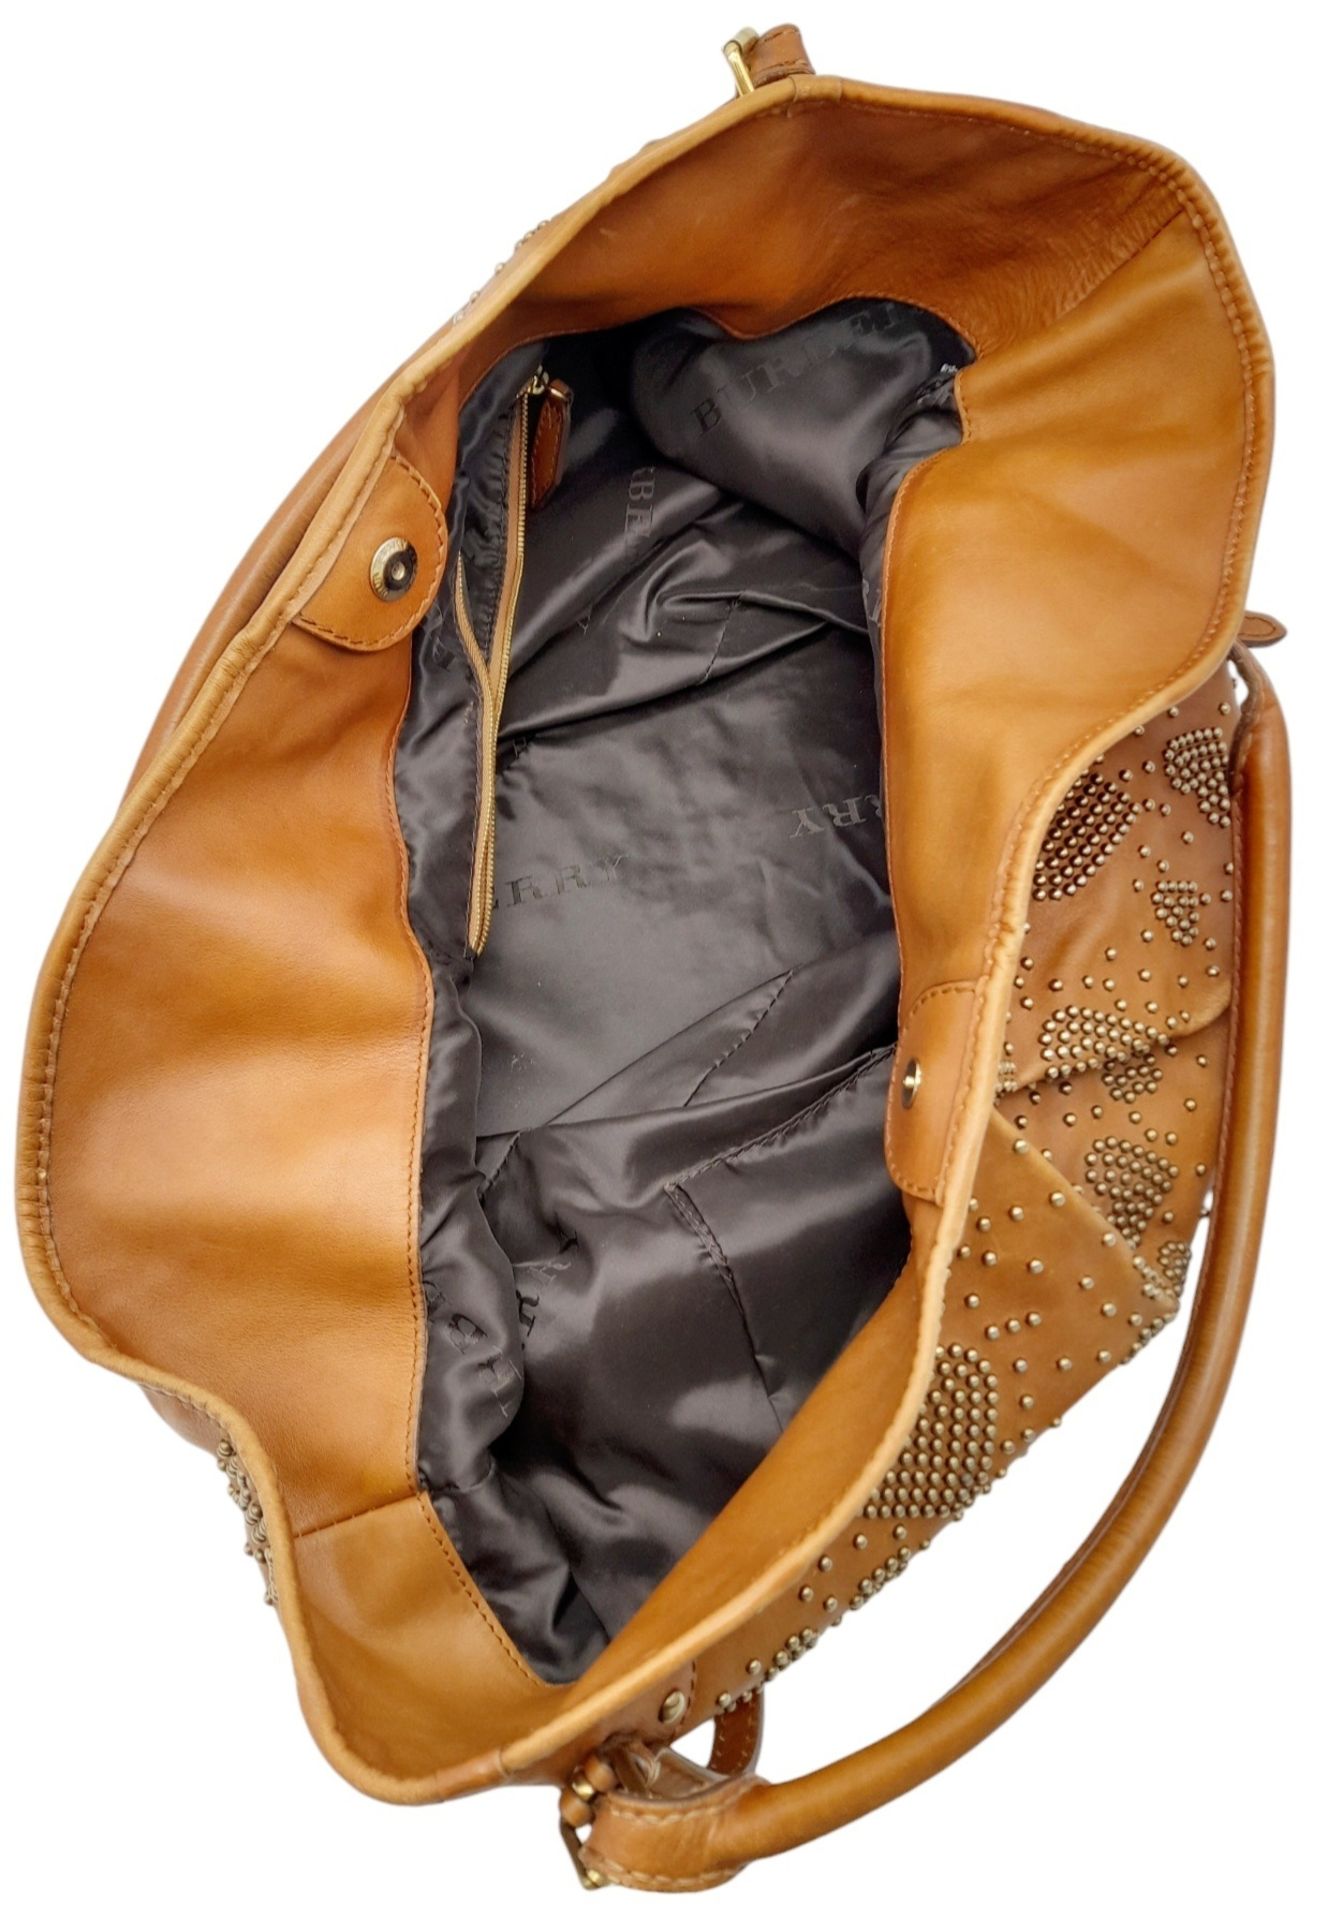 A Burberry Tan Studded Heart Hobo Bag. Leather exterior with stud embellishments, golden-toned - Bild 2 aus 8